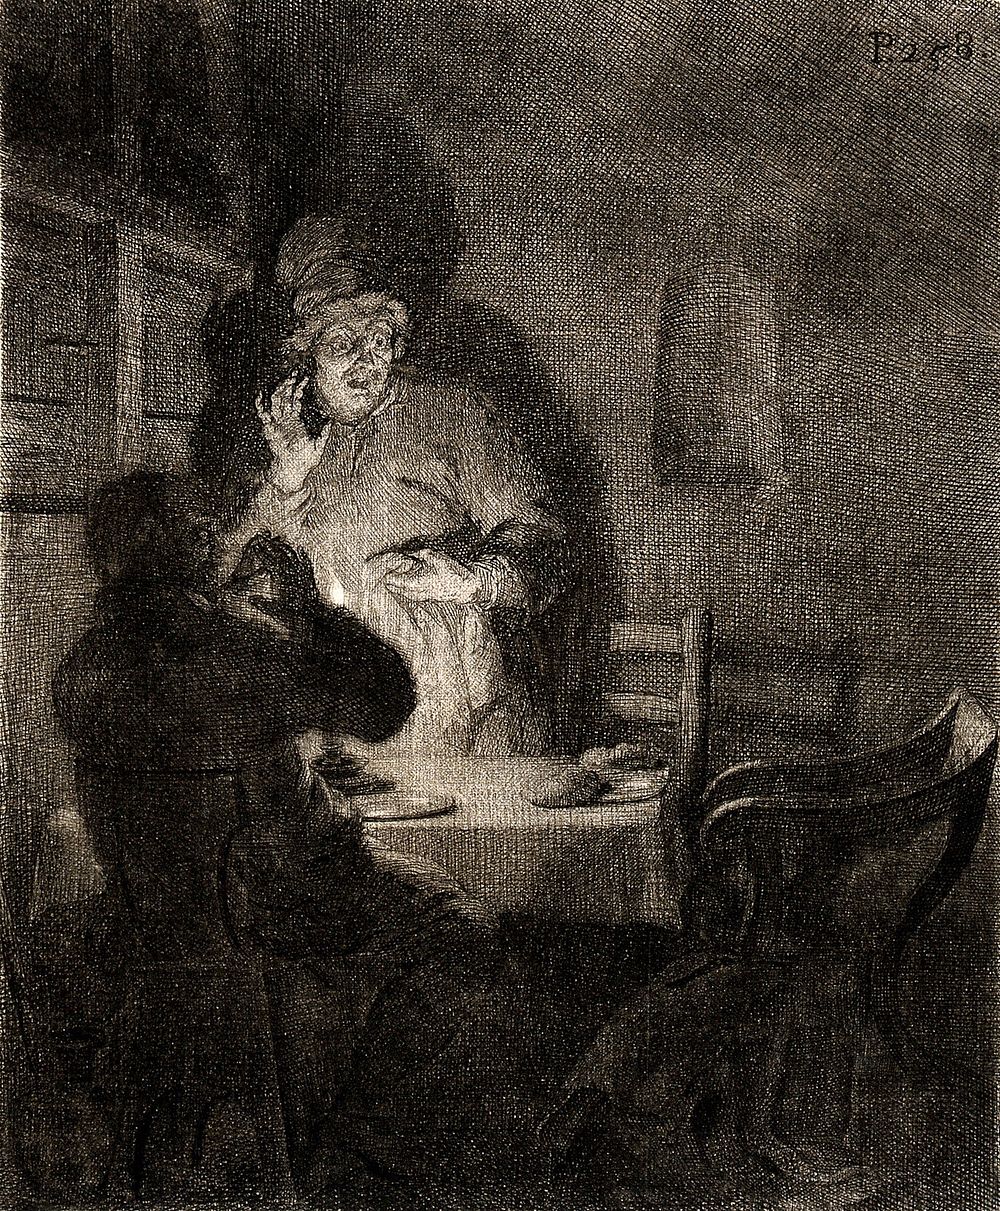 The supper at Emmaus: disciples are amazed as Christ suddenly disappears Etching by A. Houbraken after Rembrandt.